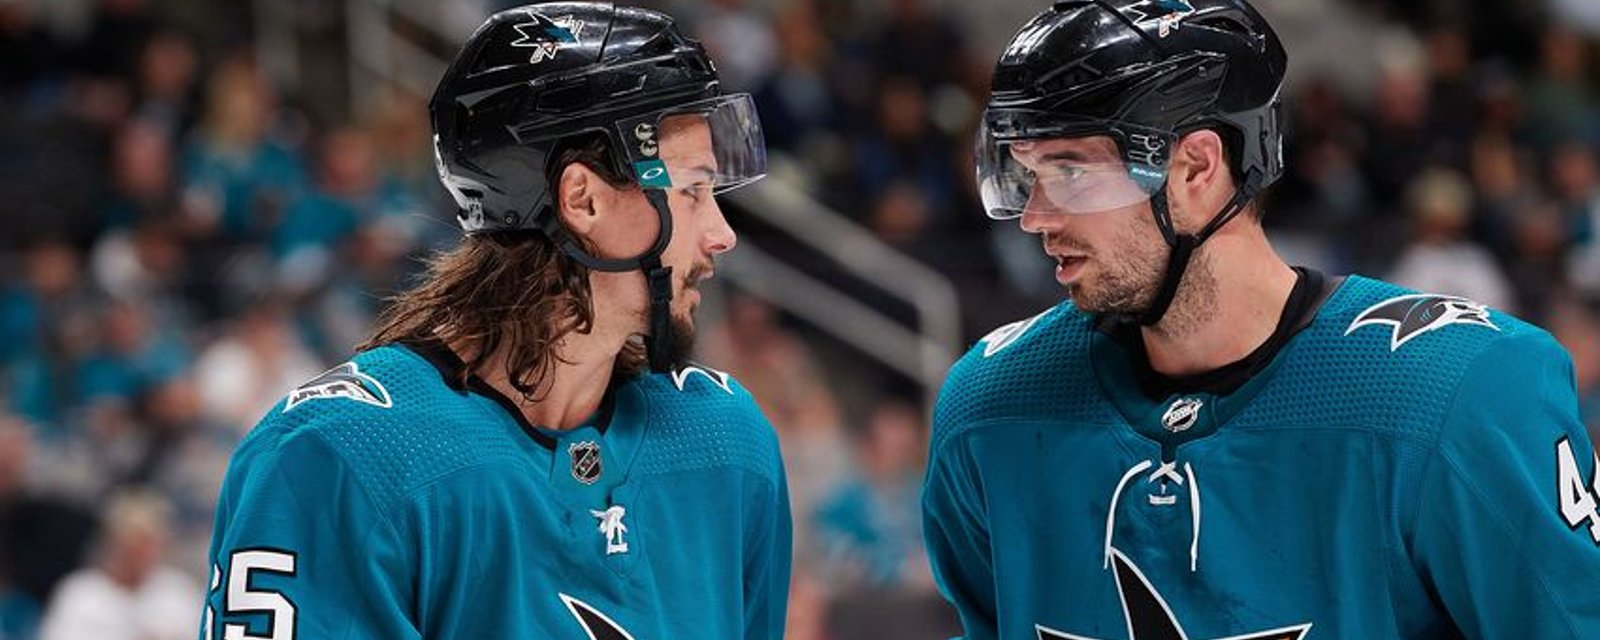 Teammate tells Karlsson to f**k off after risky hockey play!